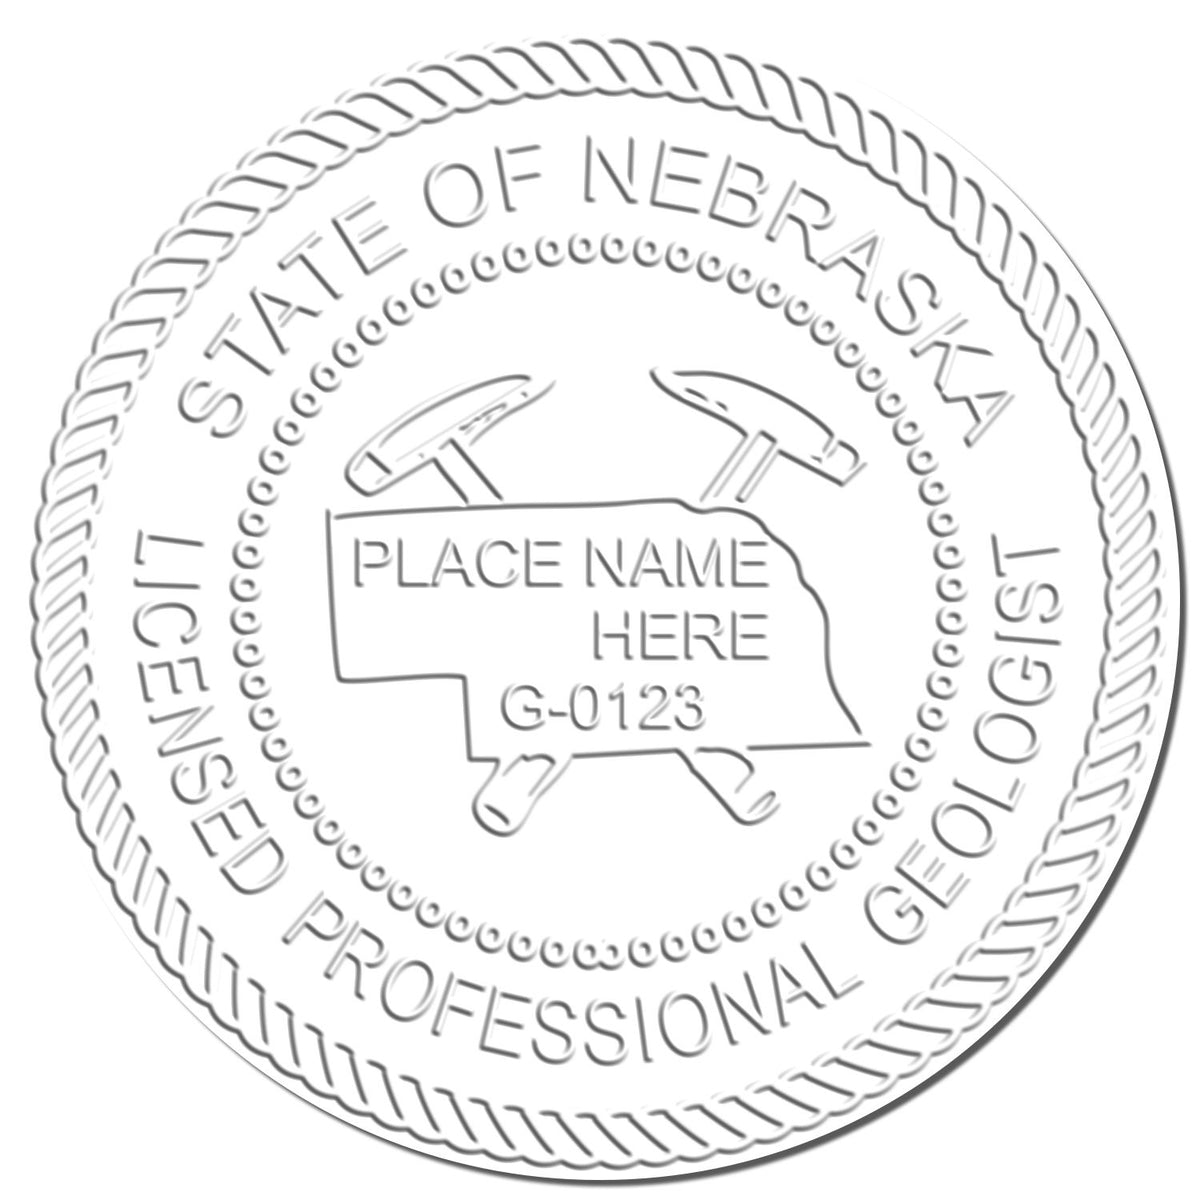 A photograph of the Hybrid Nebraska Geologist Seal stamp impression reveals a vivid, professional image of the on paper.